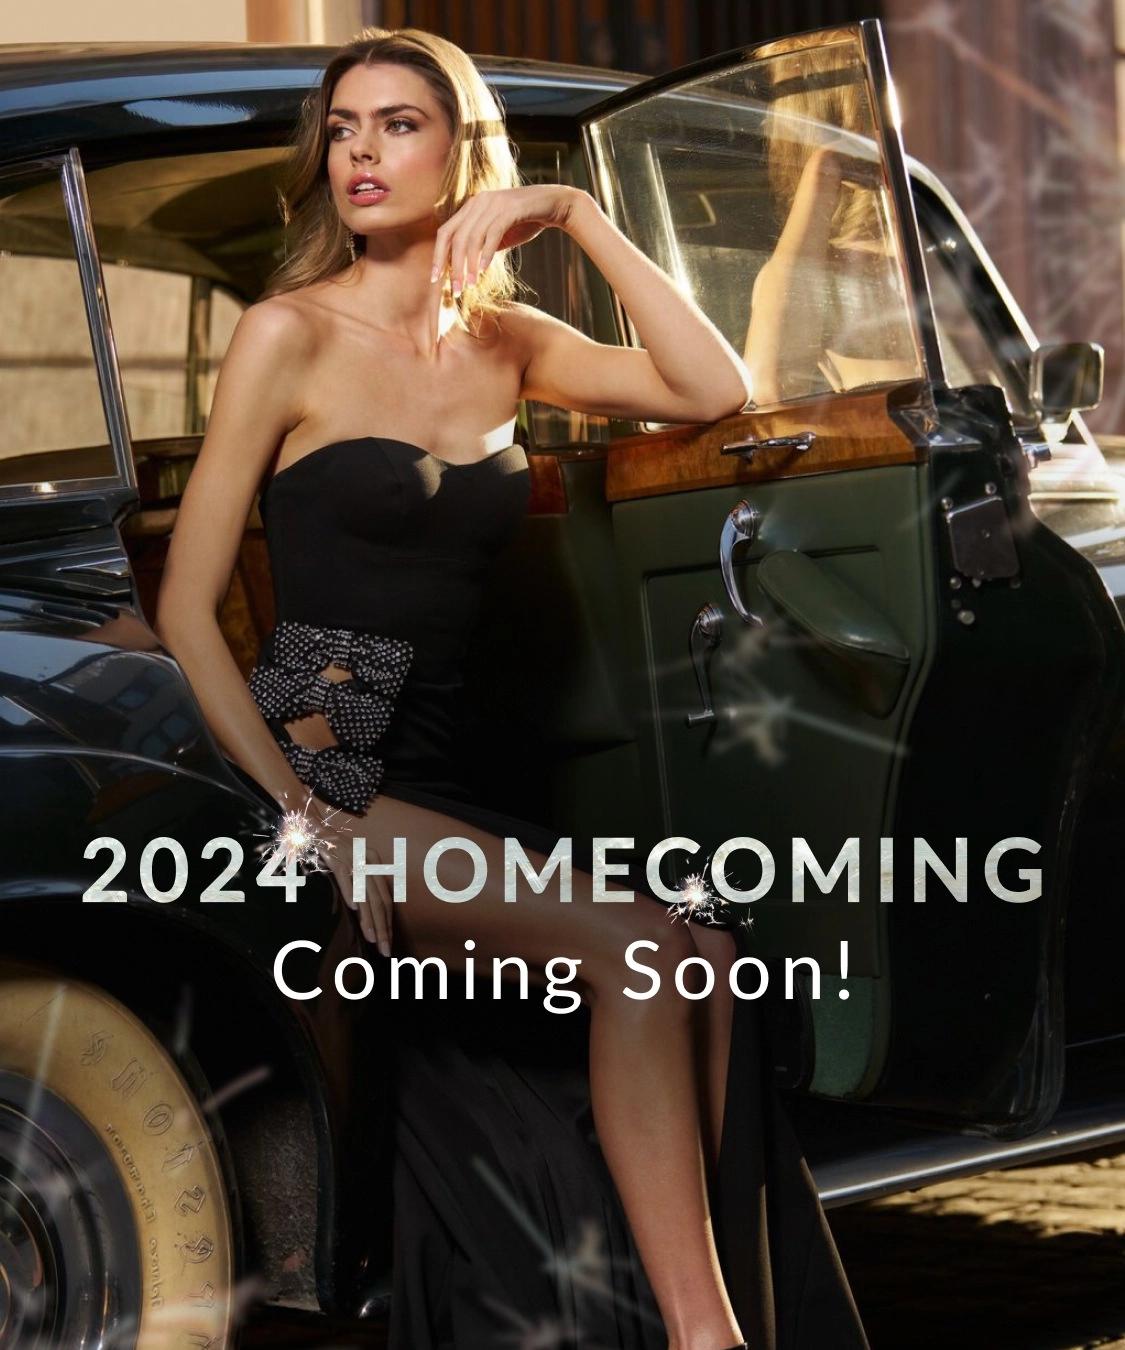 2024 Homecoming coming soon banner for mobile